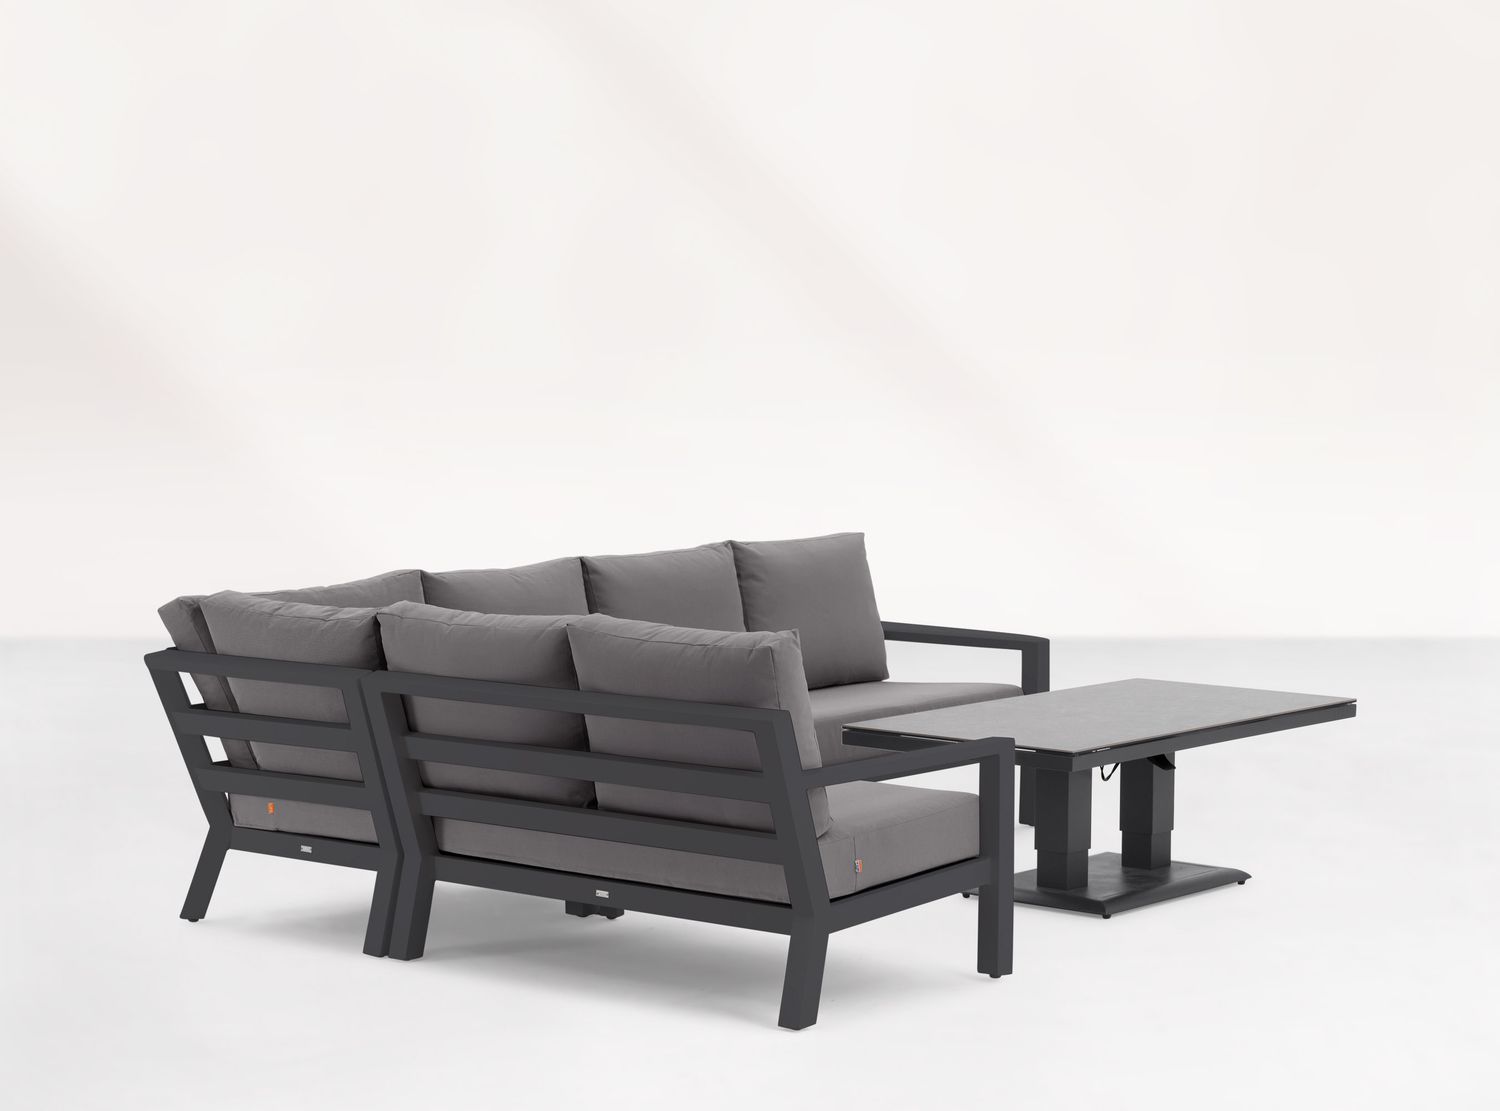 LIFE Dining-Loungeecke Set1 TIMBER lava inkl. Polster in